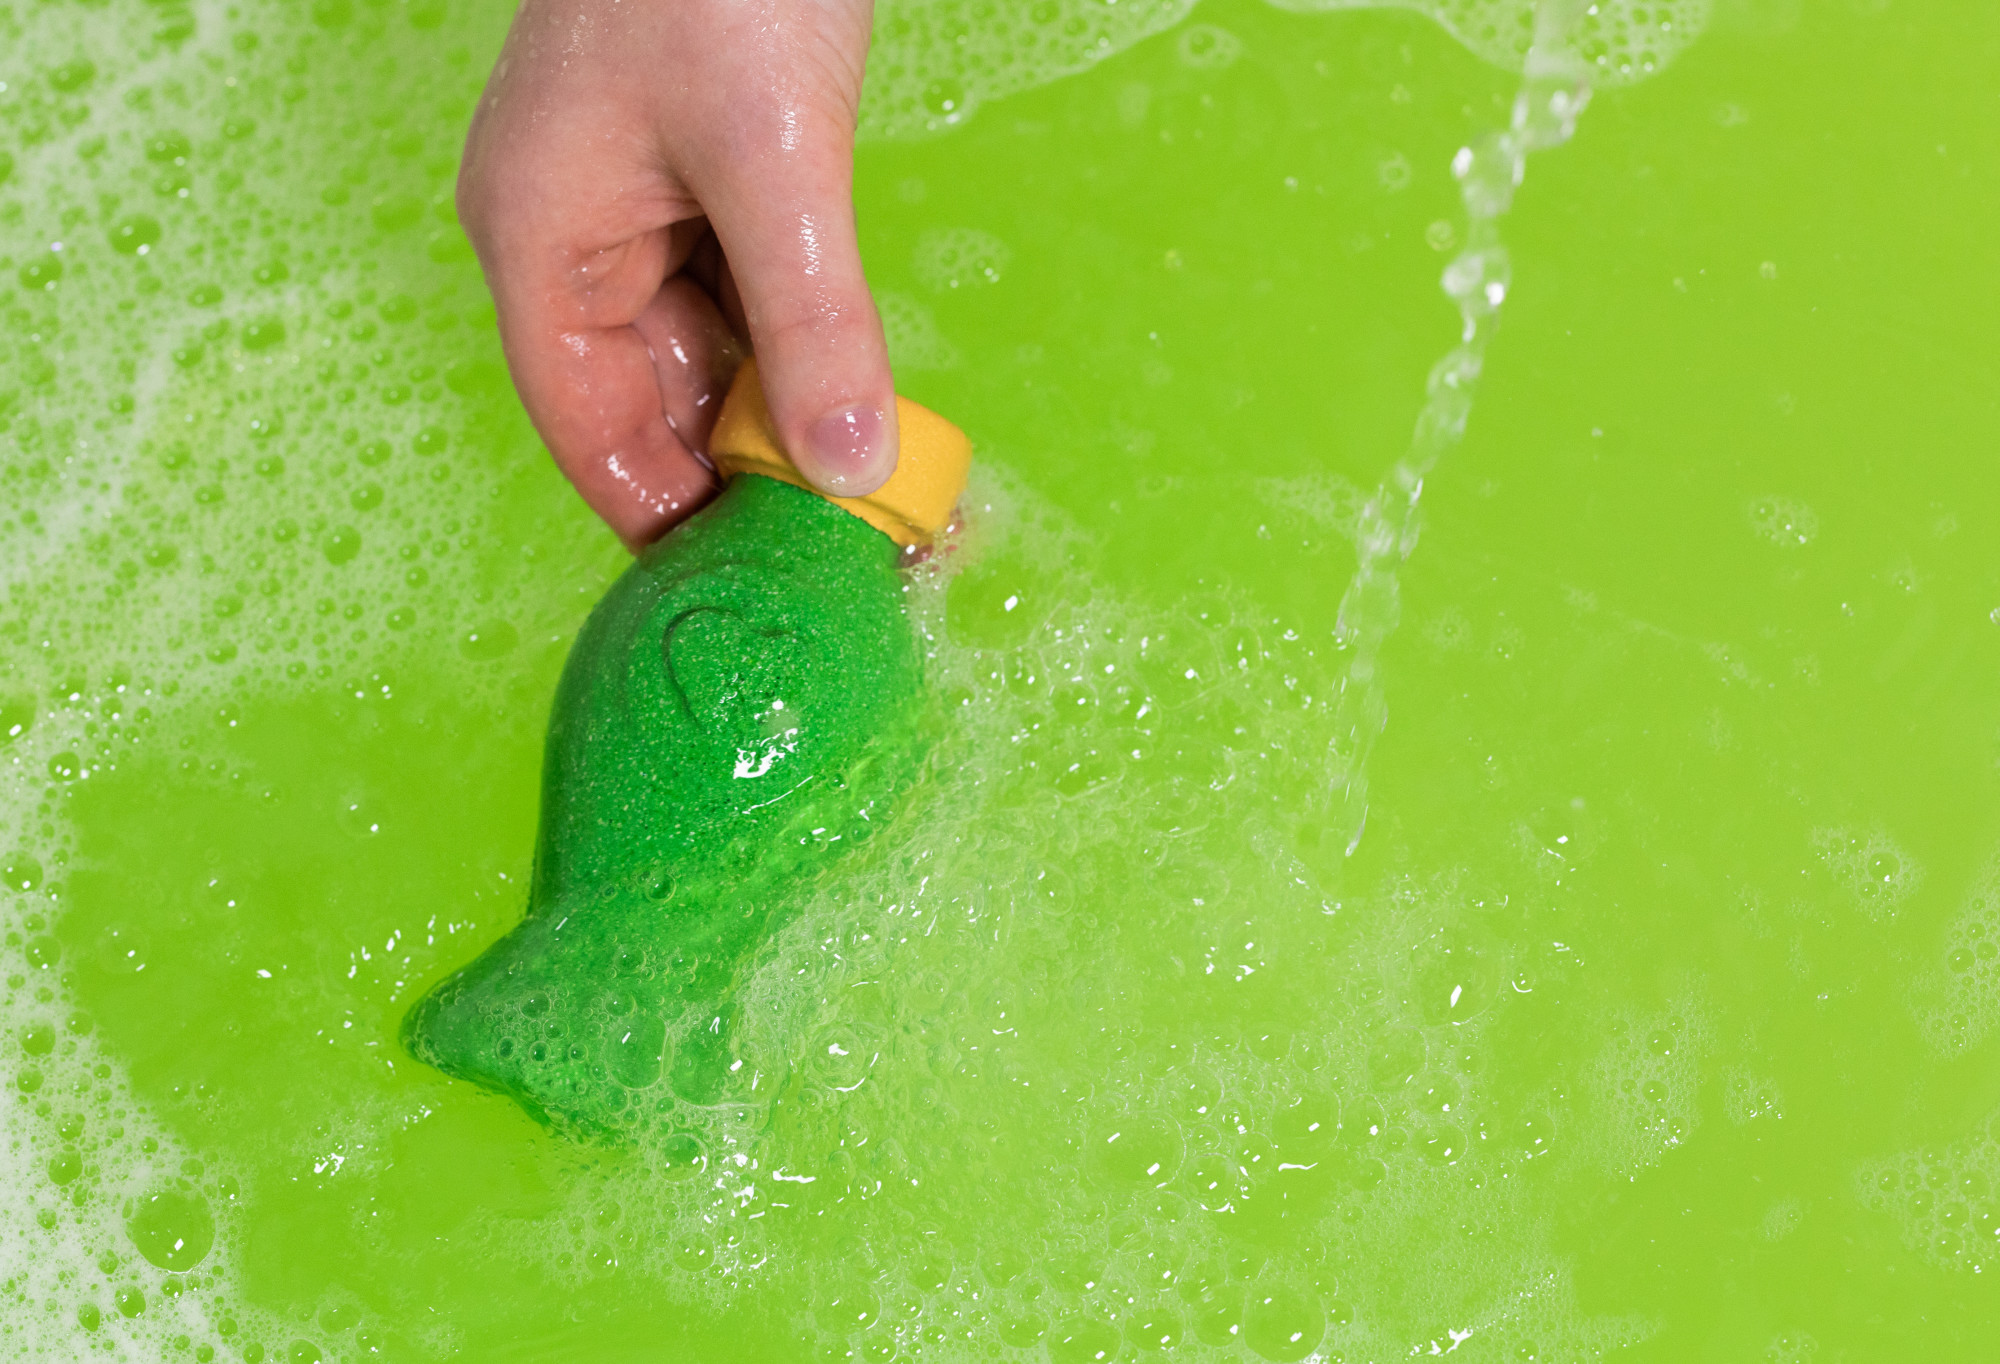 A hand is holding the golden lid of the green Love perfume bubble bottle in green water. Water is running nearby with bubbles.